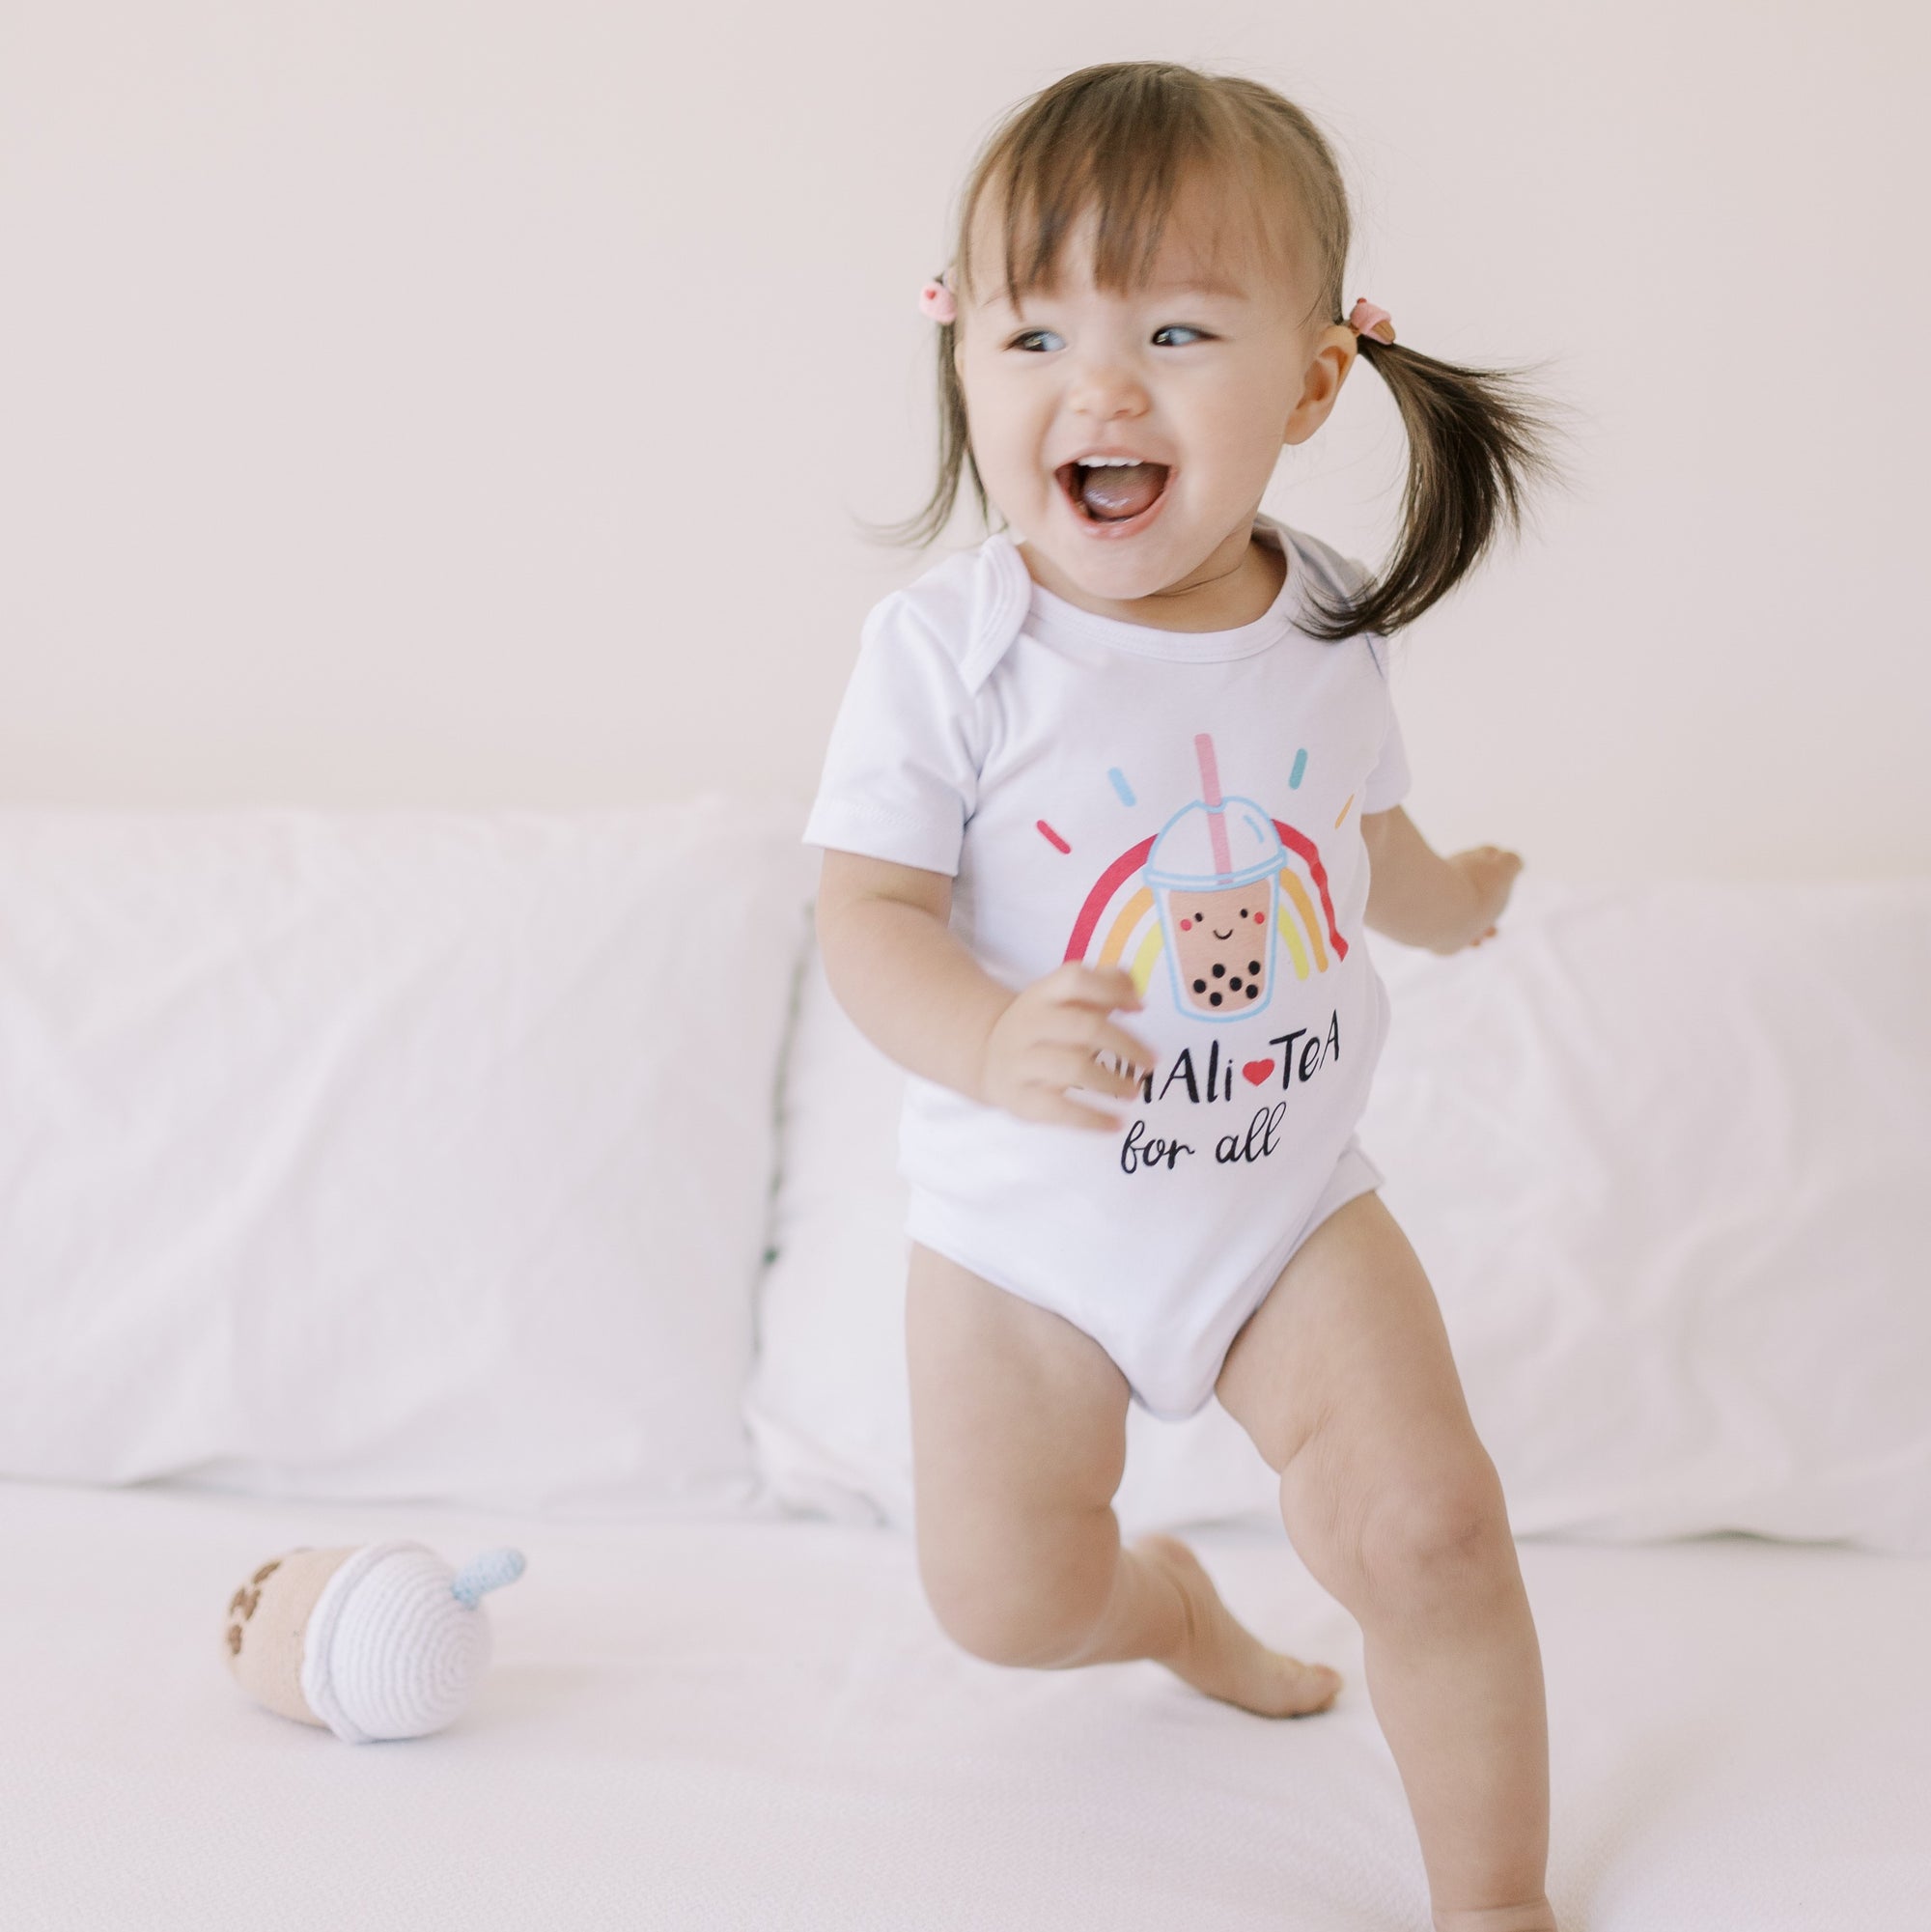 the wee bean organic cotton onesie in boba equali-tea for all anti-hate anti-violence charity